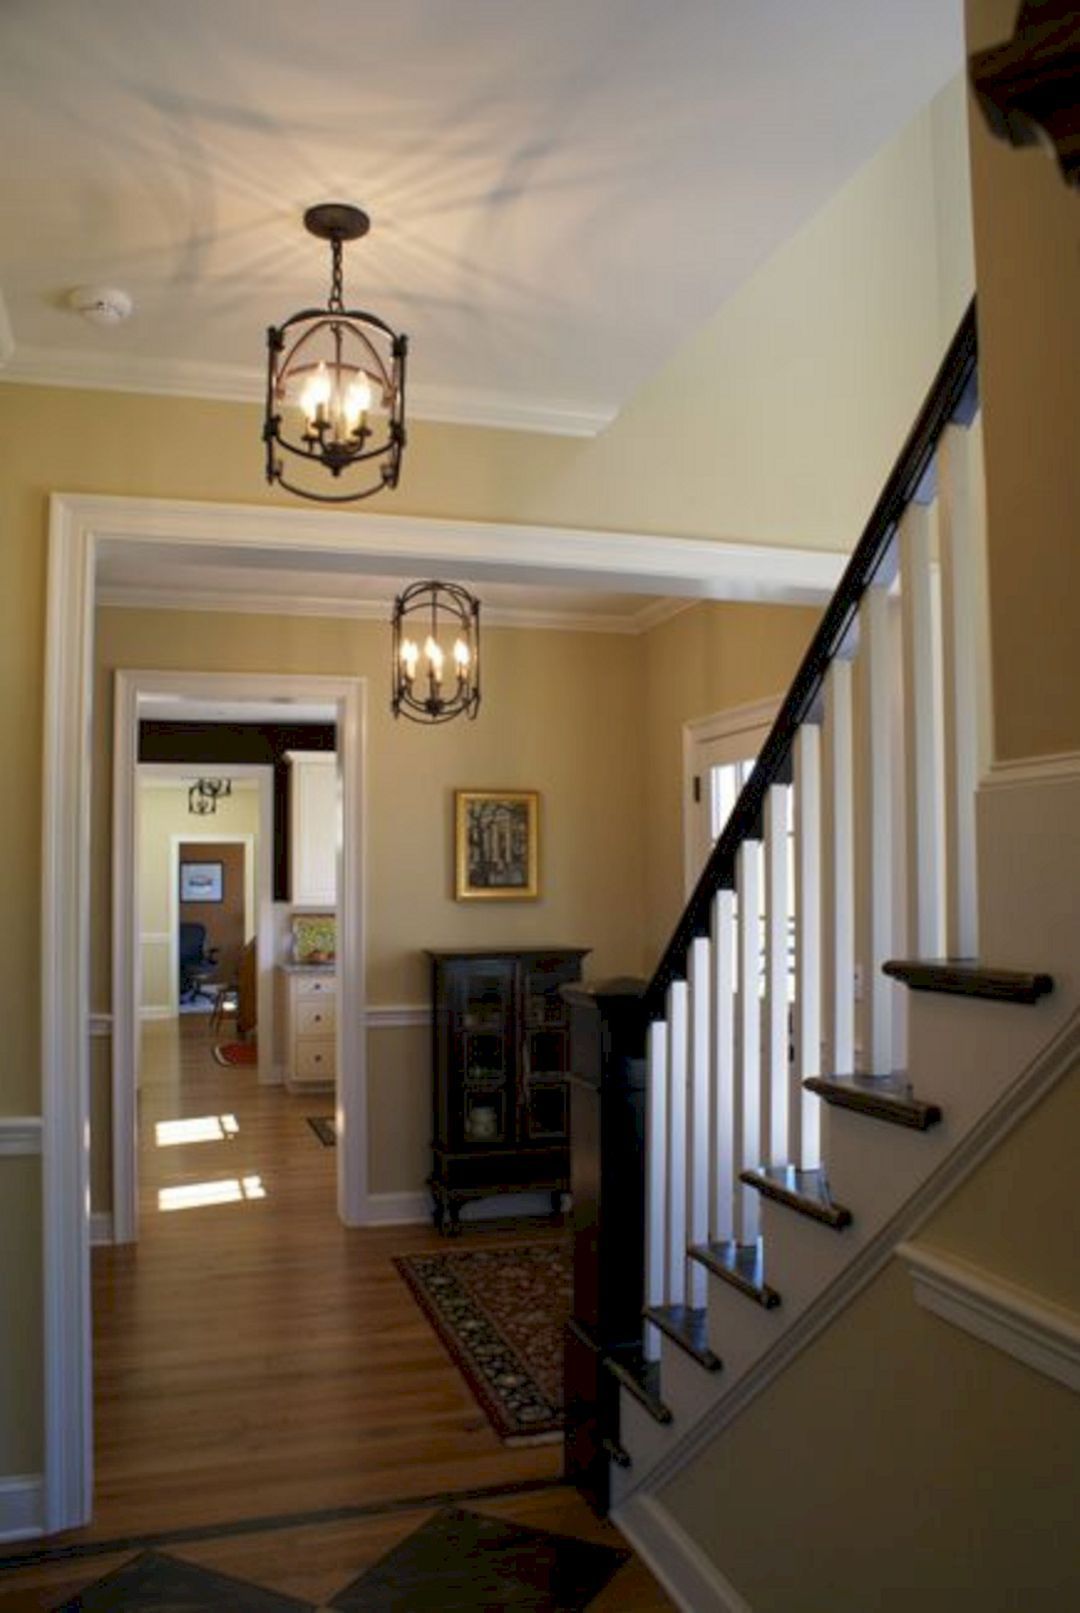 Unique Hallway Light Fixtures: Illuminate Your Home With Style